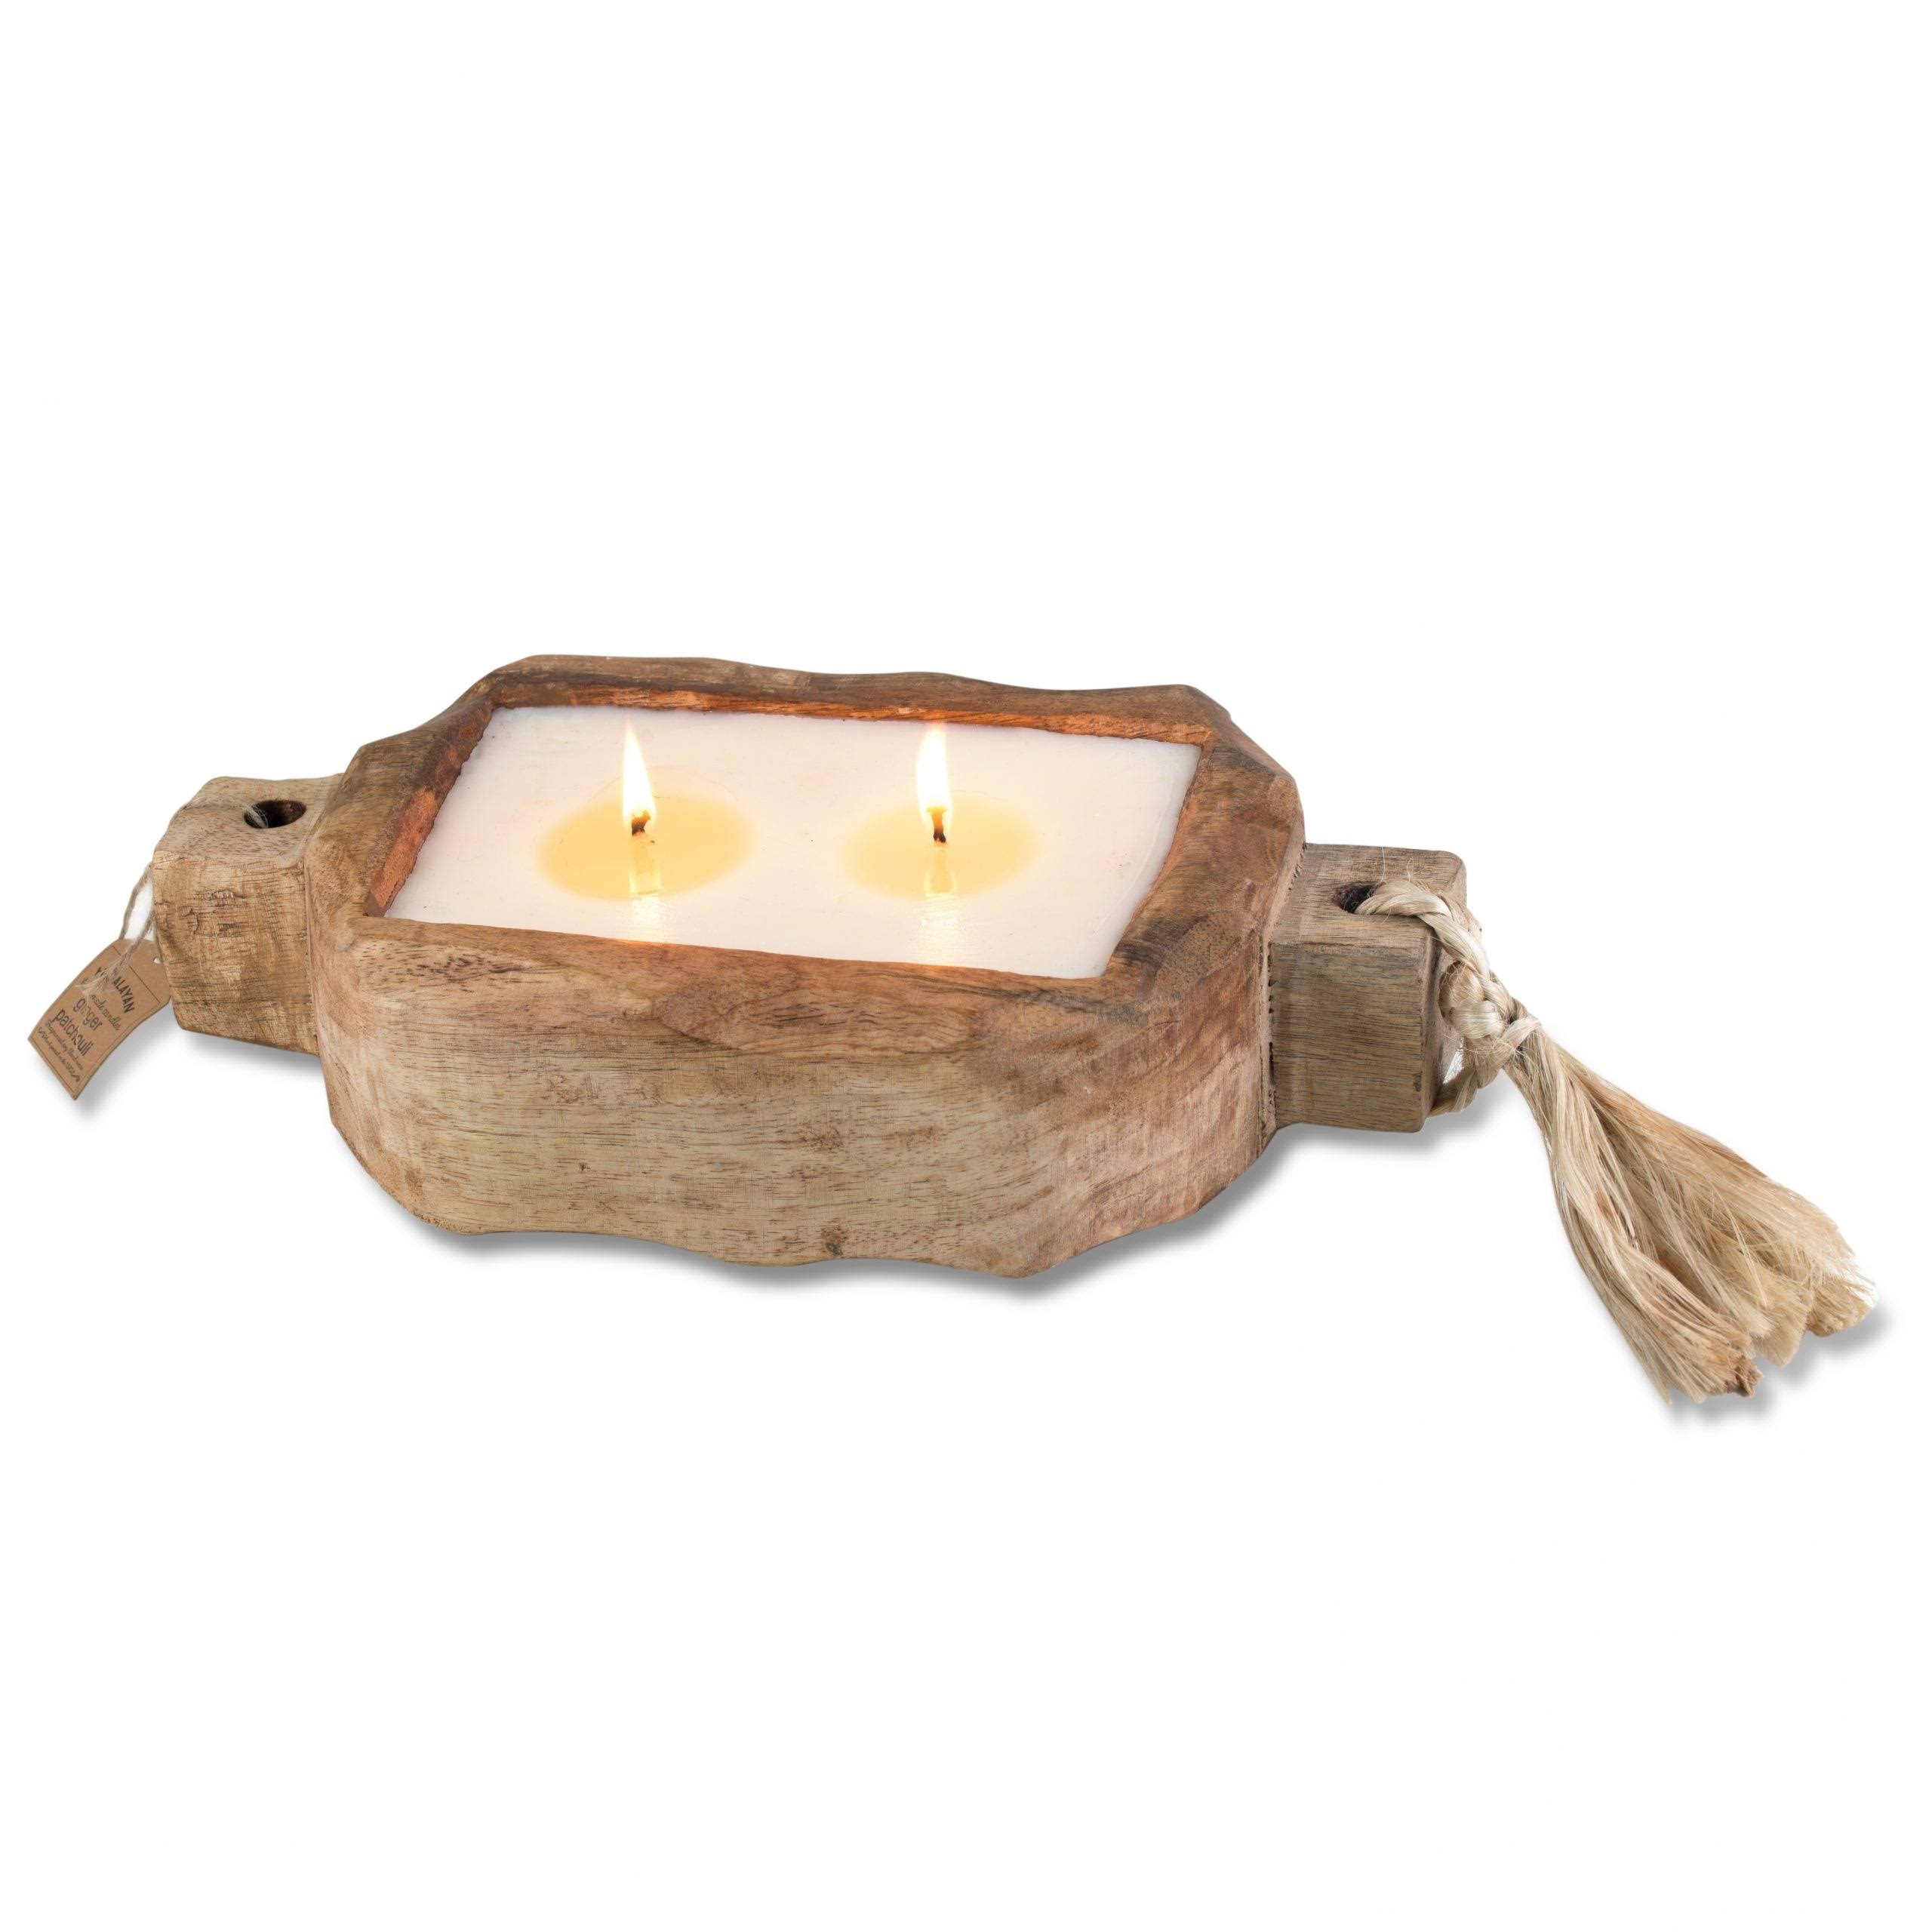 Driftwood Tray Candle Ginger Patchouli